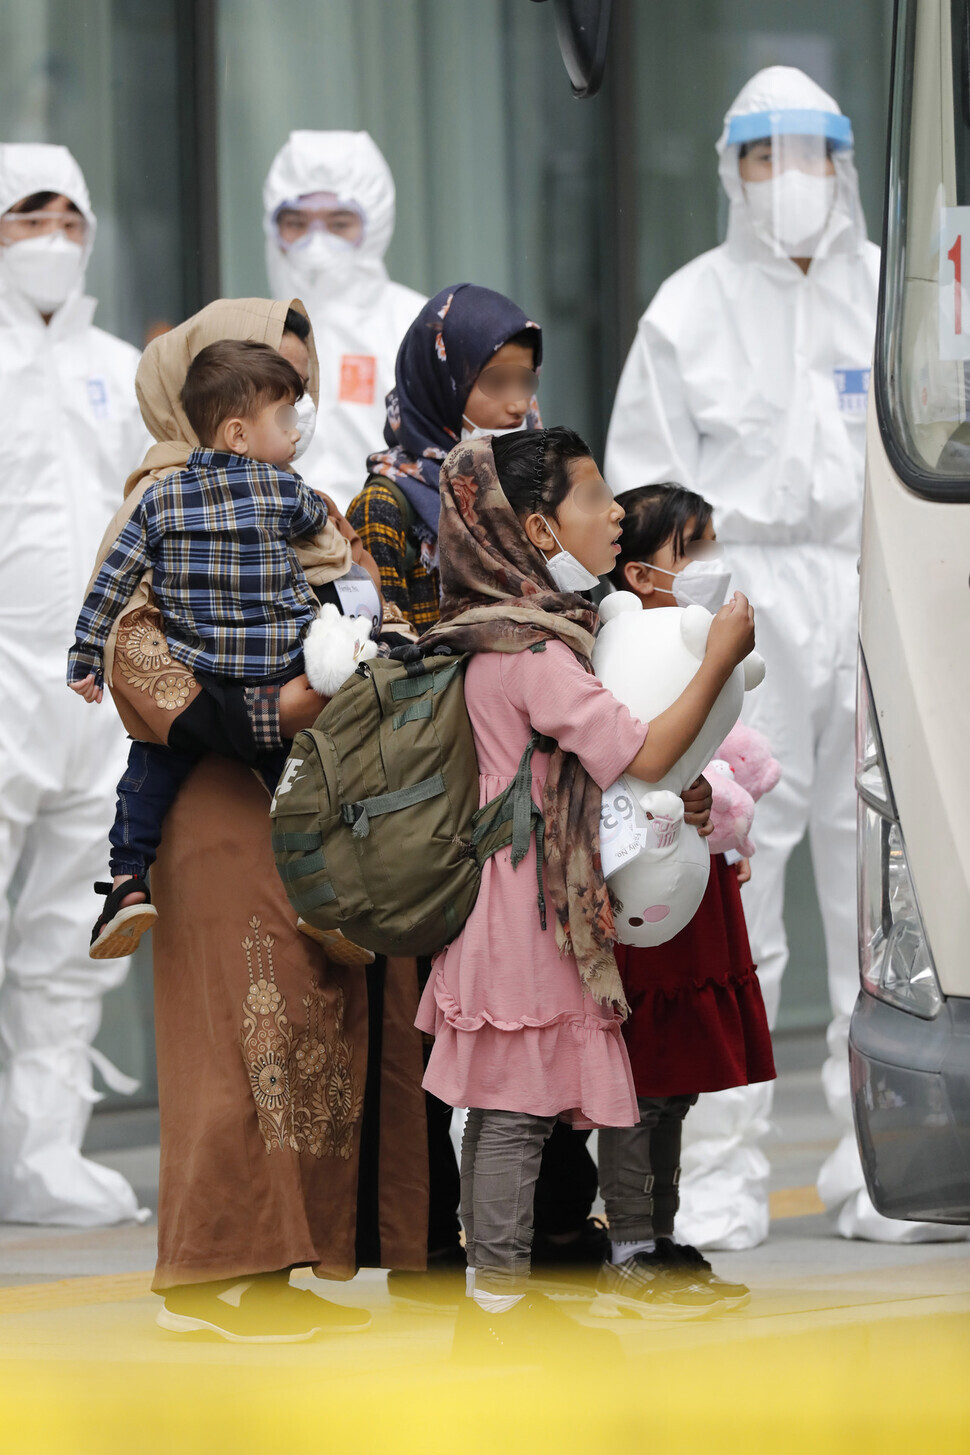 An Afghan family boards a bus on Friday to the National Human Resources Development Institute in Jincheon, North Chungcheong Province, from a hotel in Gimpo, Gyeonggi Province, where they stayed temporarily for a day. (Lee Jeong-a/The Hankyoreh)